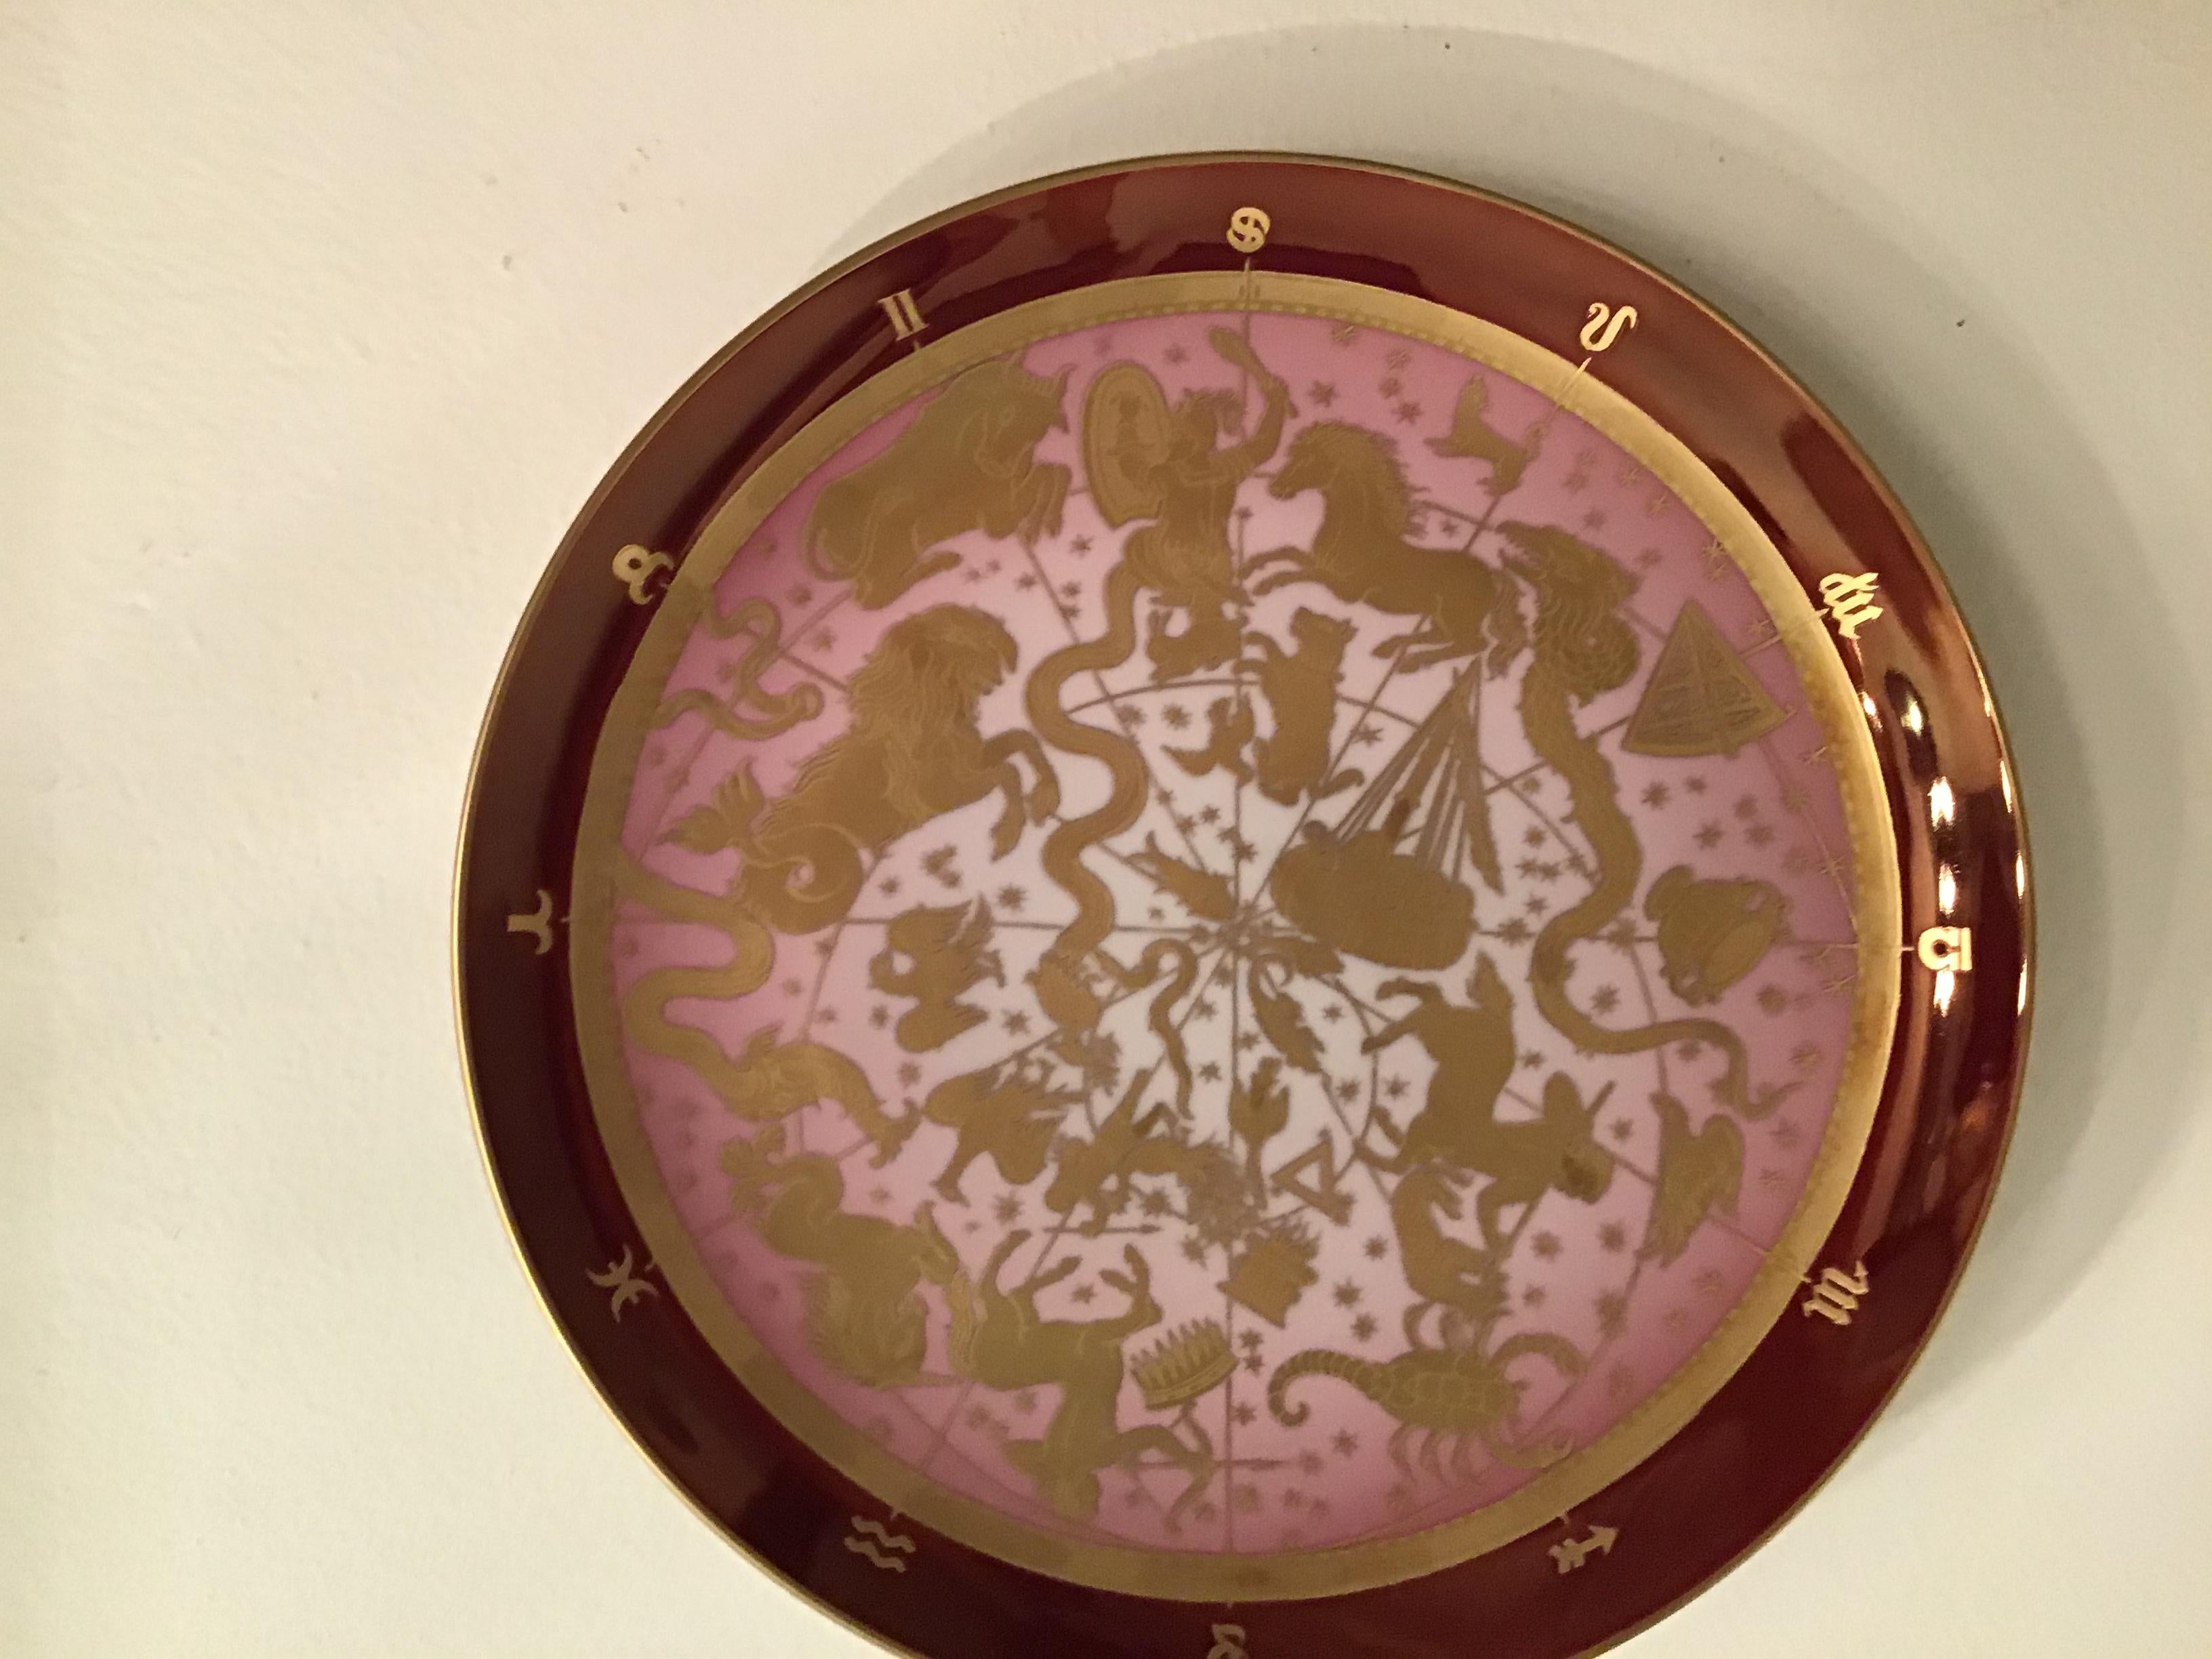 Morbelli Porcelain Wall Plate “Planisfero Celeste“ Worked with Pure Gold 1960 IT For Sale 5